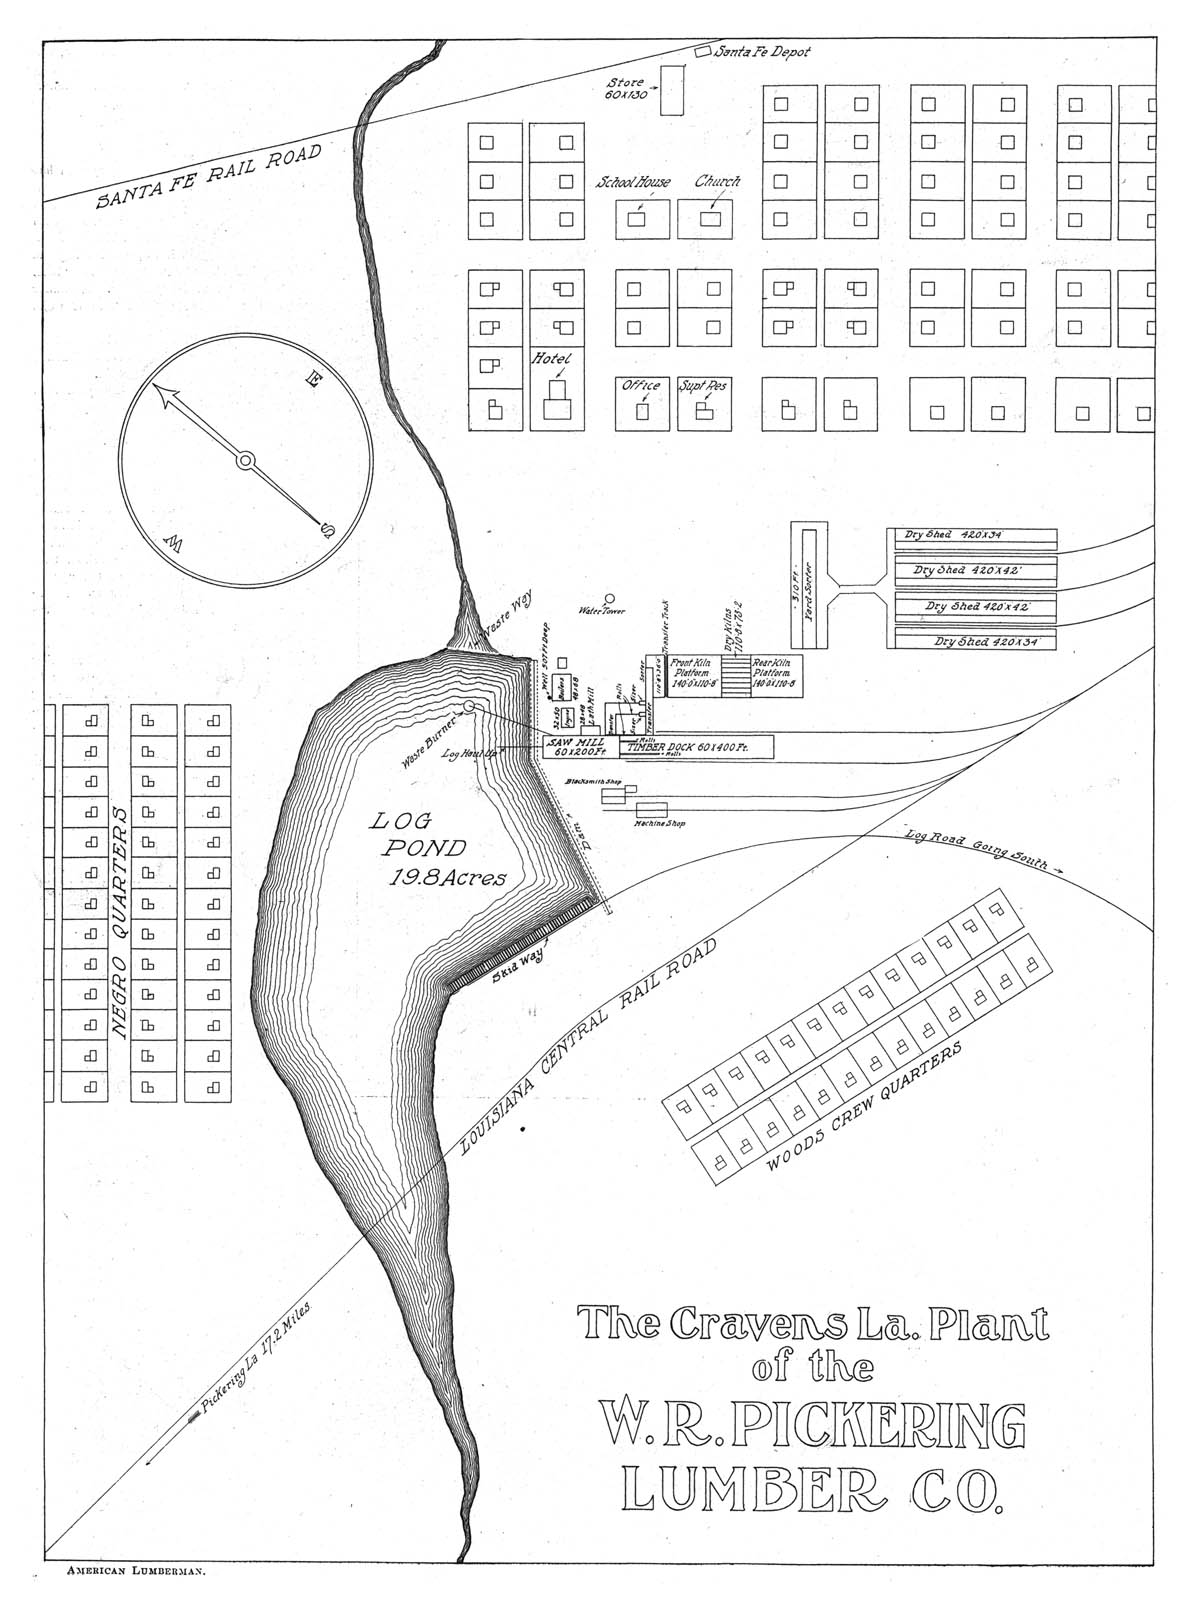 W.R. Pickering Lumber Company (La.), Map Showing Mill Layout at Cravens, Louisiana in 1906.